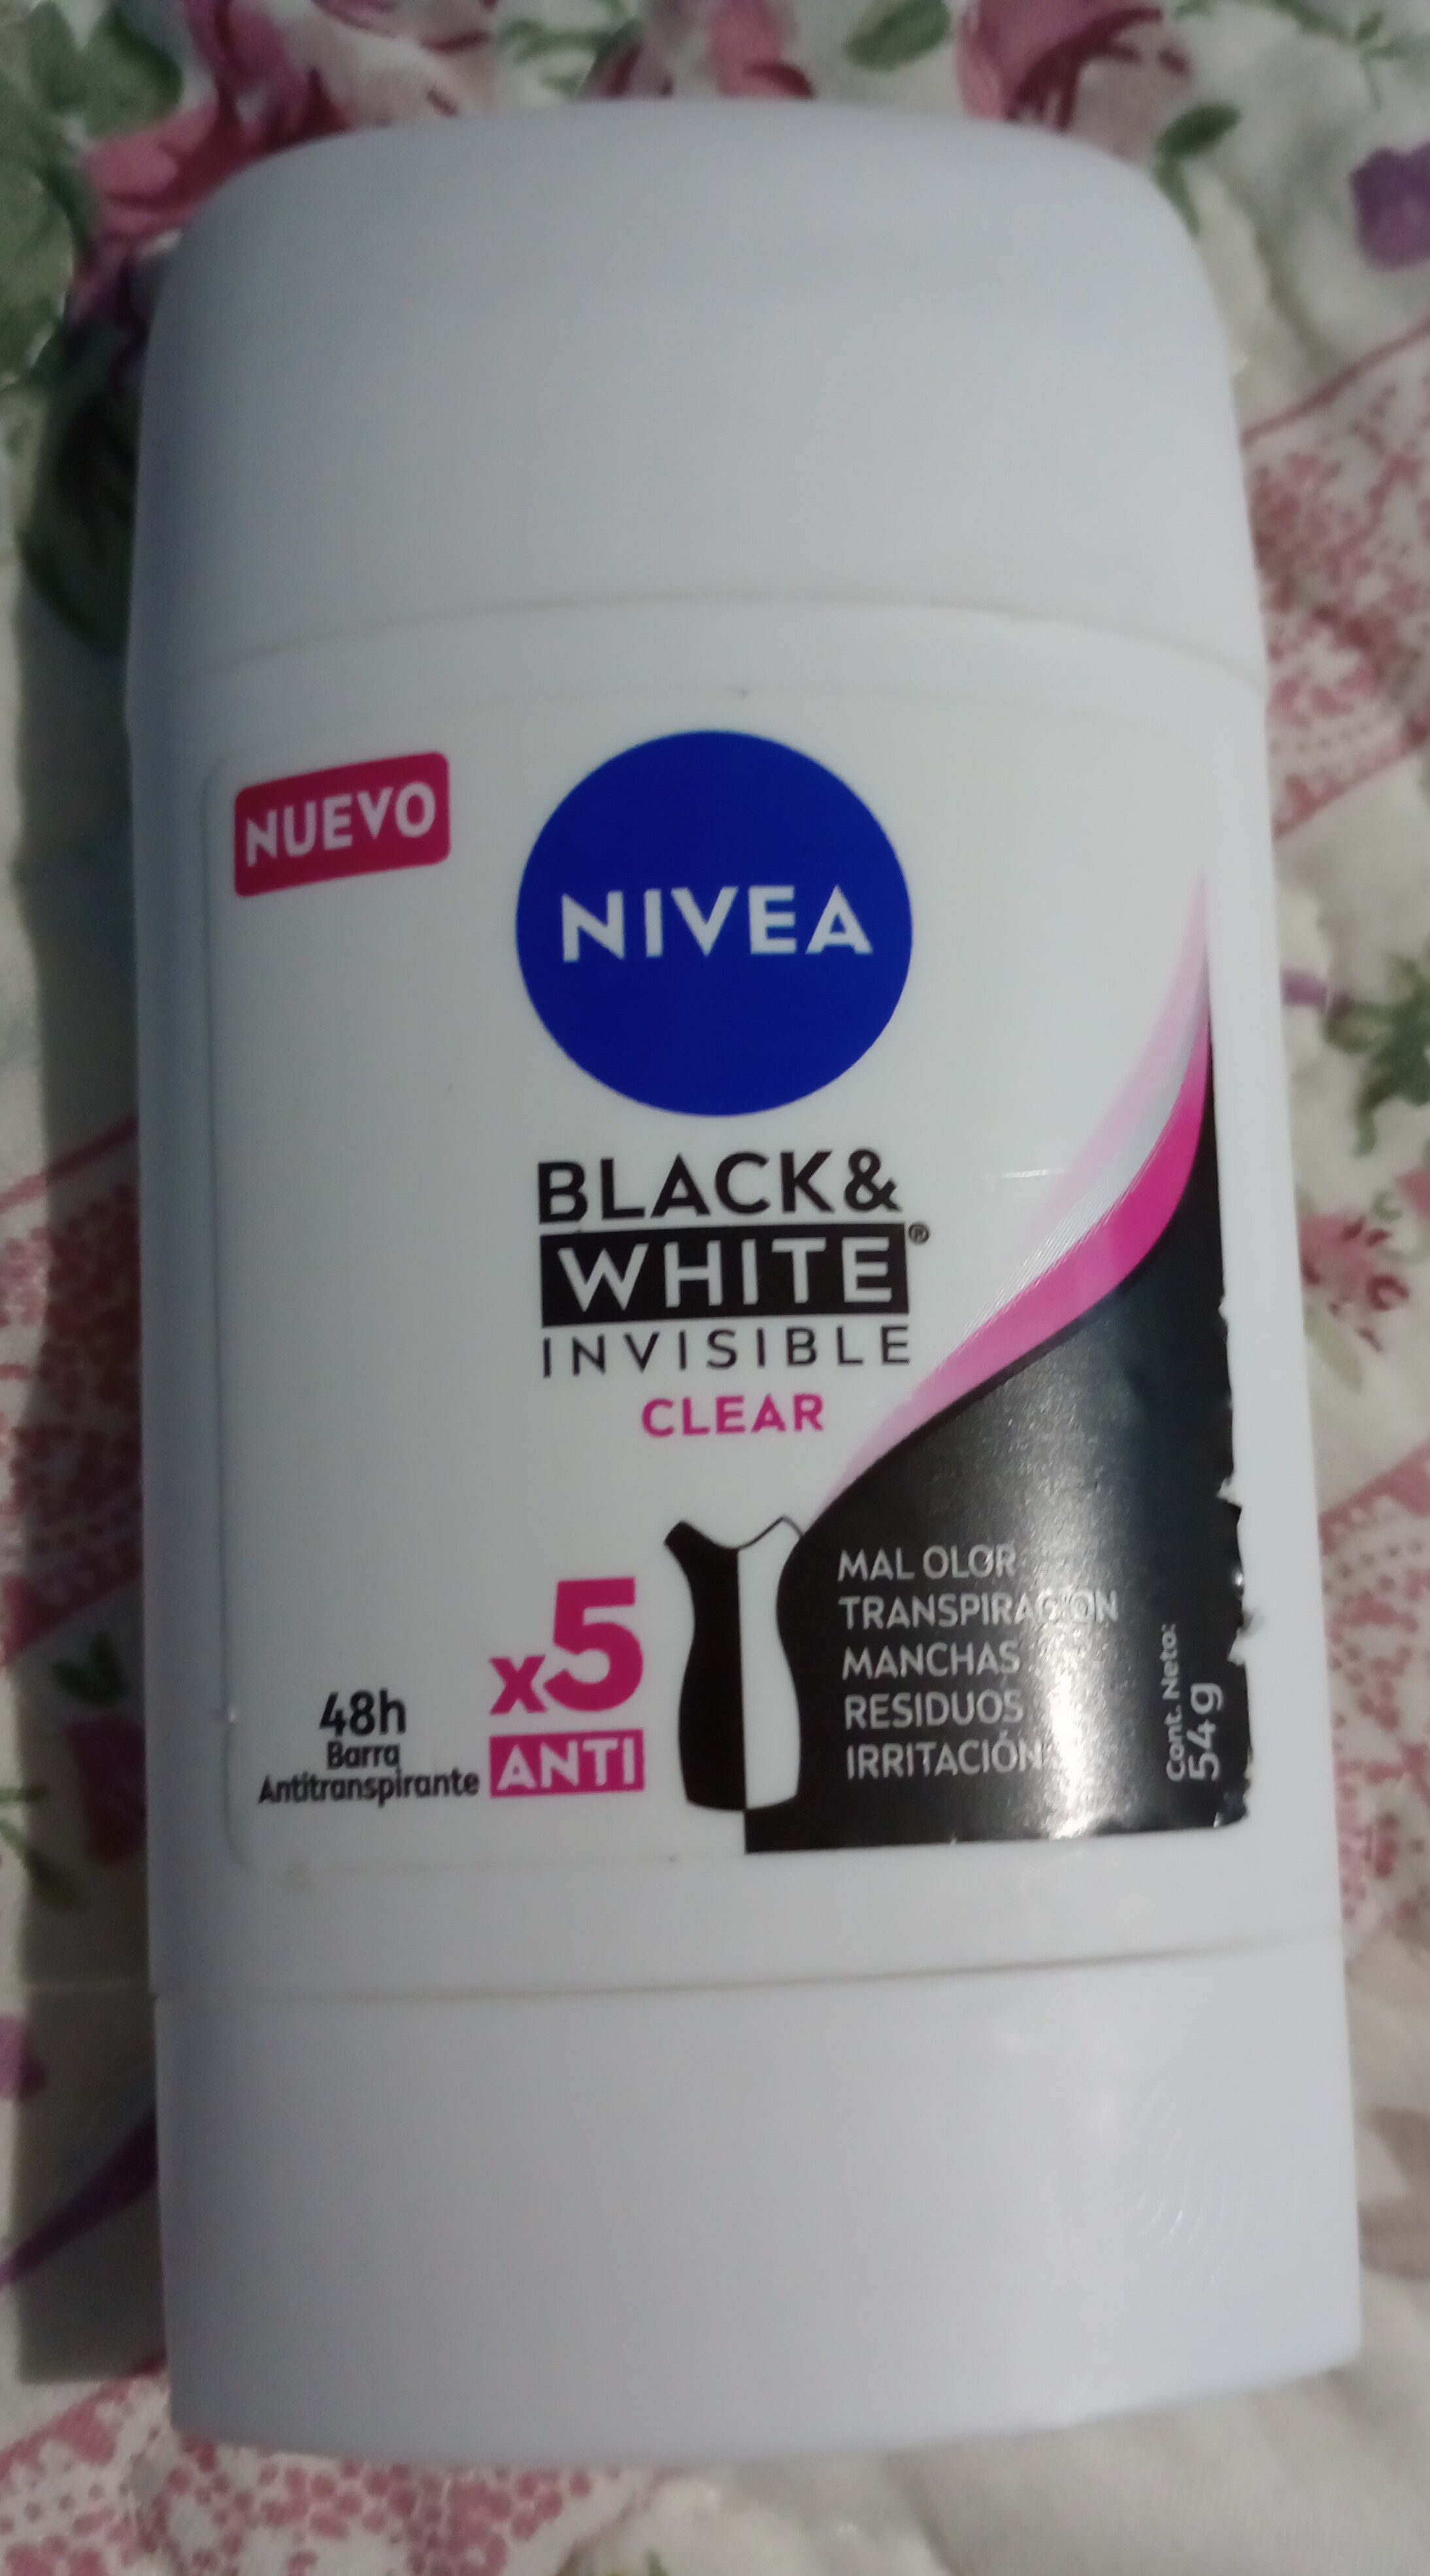 Invisible Black & White Clear - Produkt - es